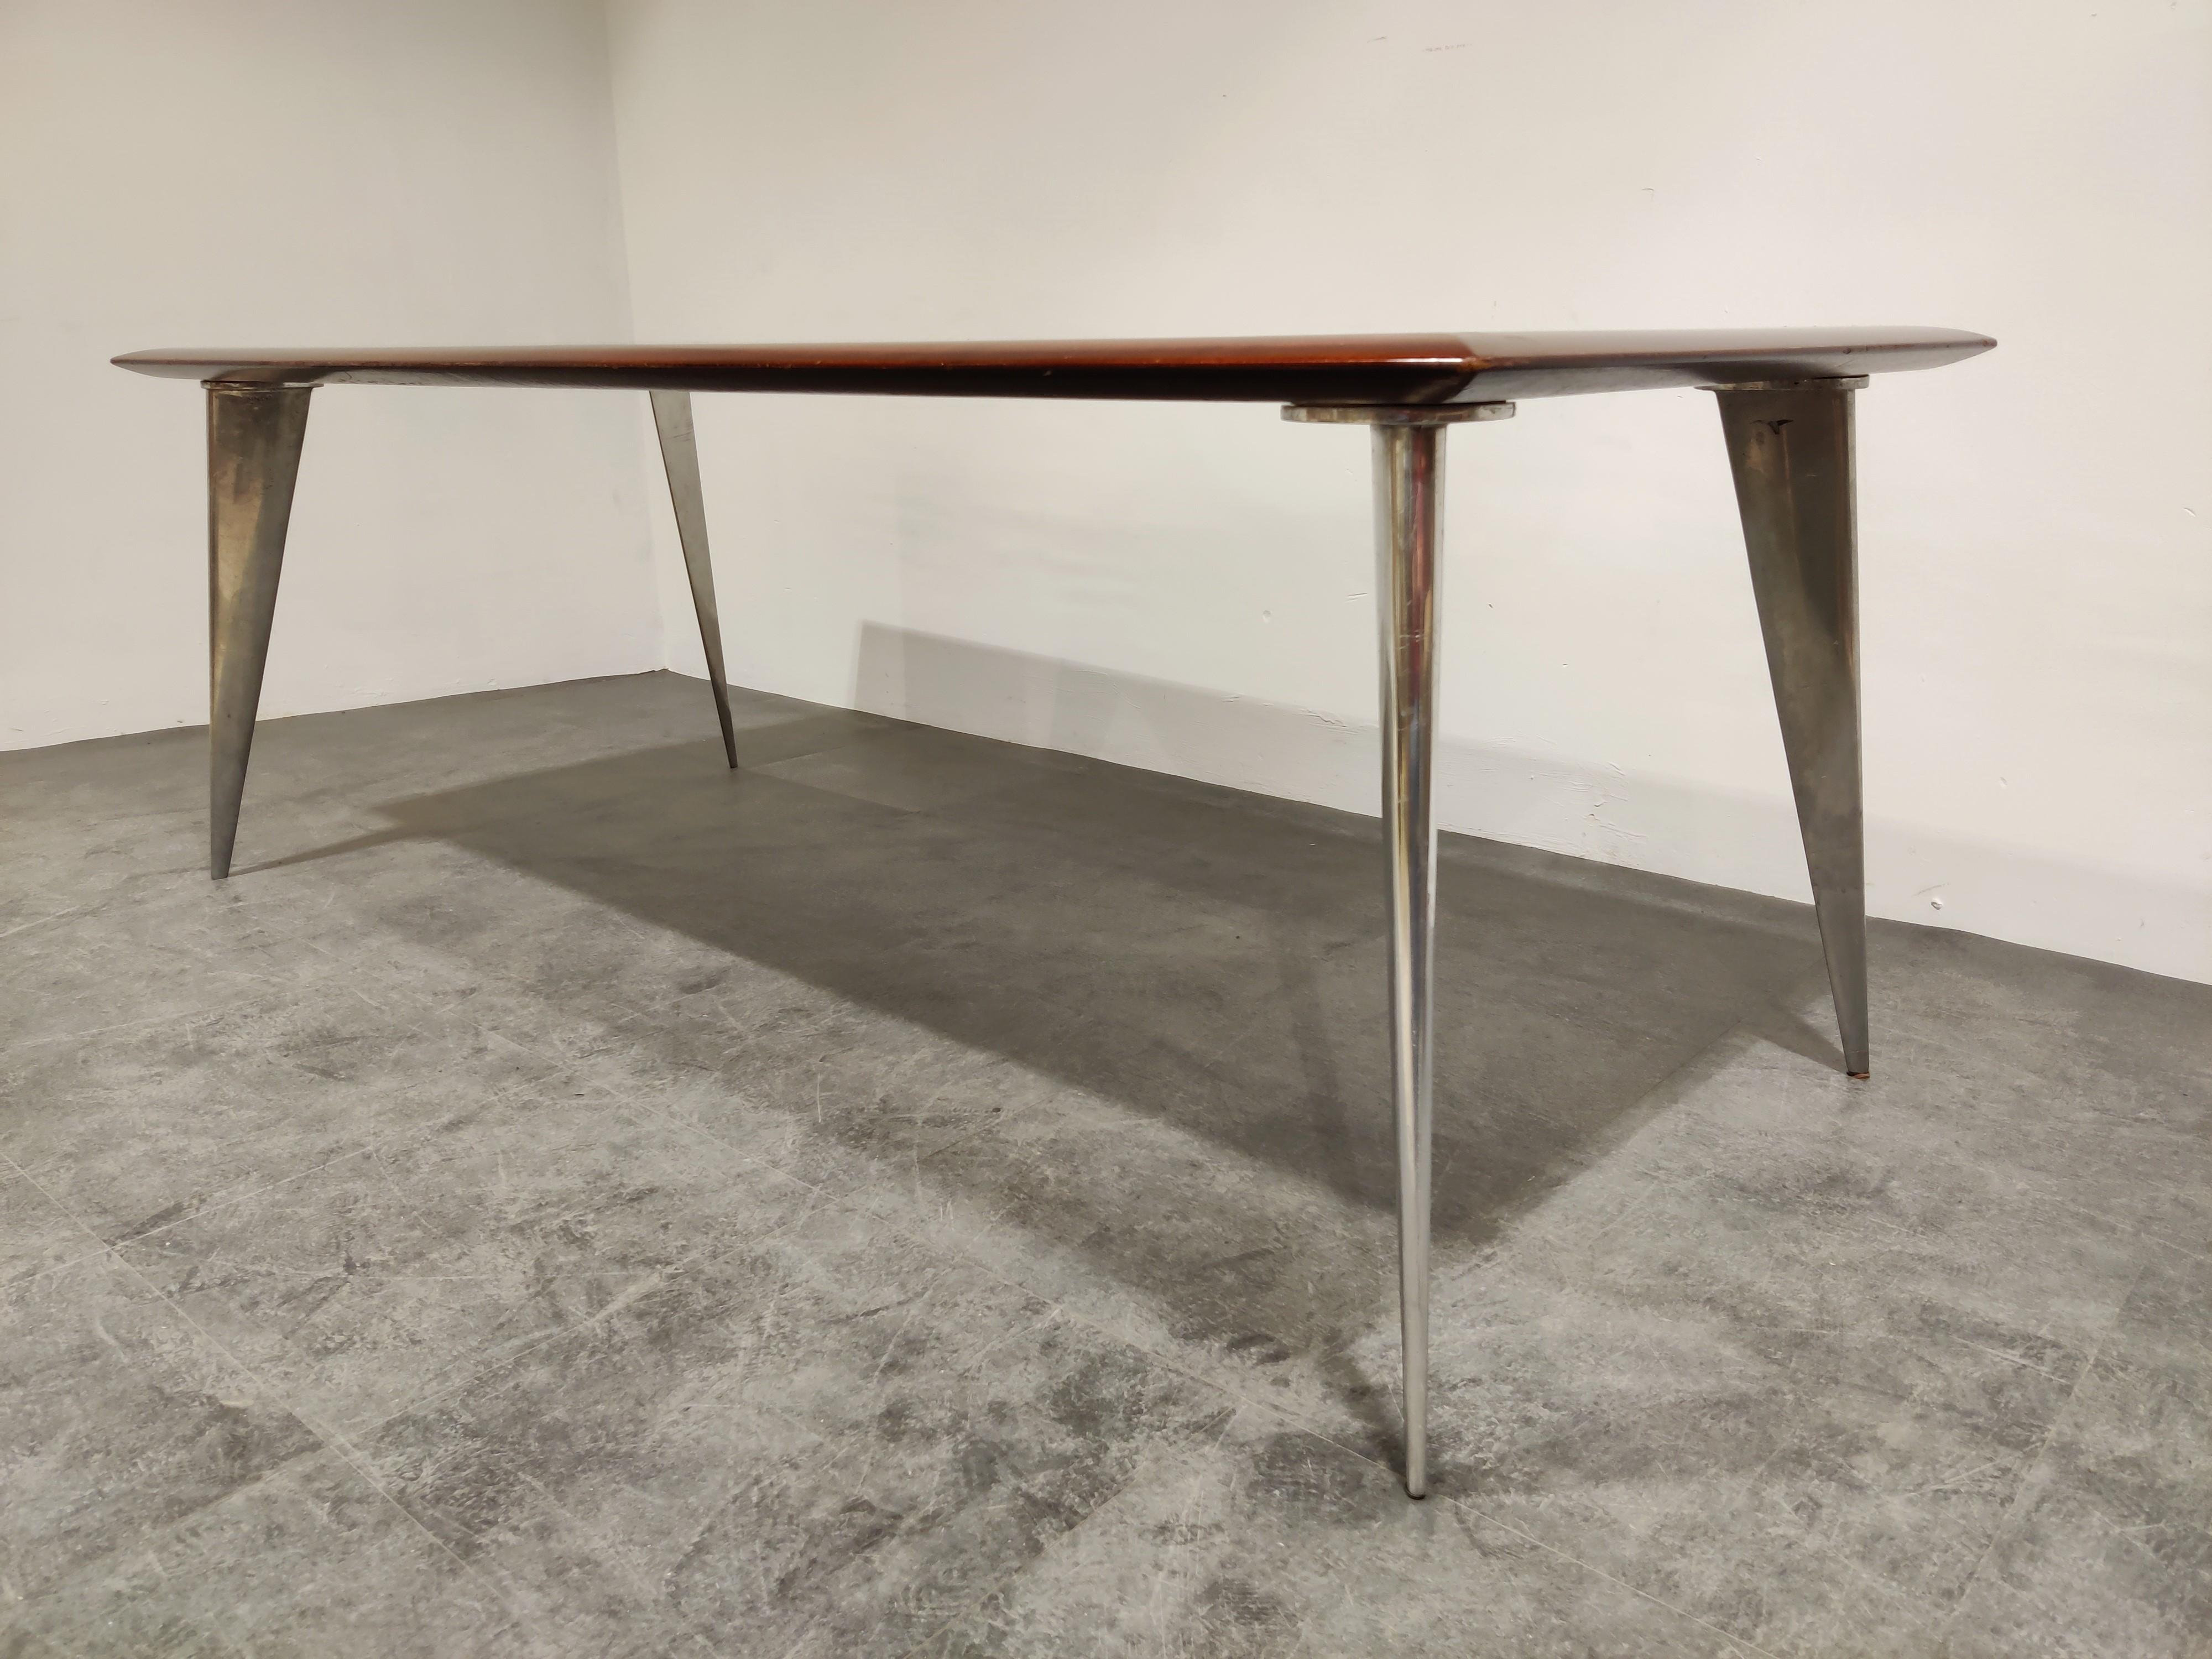 Sleek and elegant dining table designed by Philippe Starck for Aleph.

Model M from the limited series Lang

Beautiful mahogany wooden top with cast aluminum legs, stamped with 'Starck'. 

The table is in good overall condition with normal